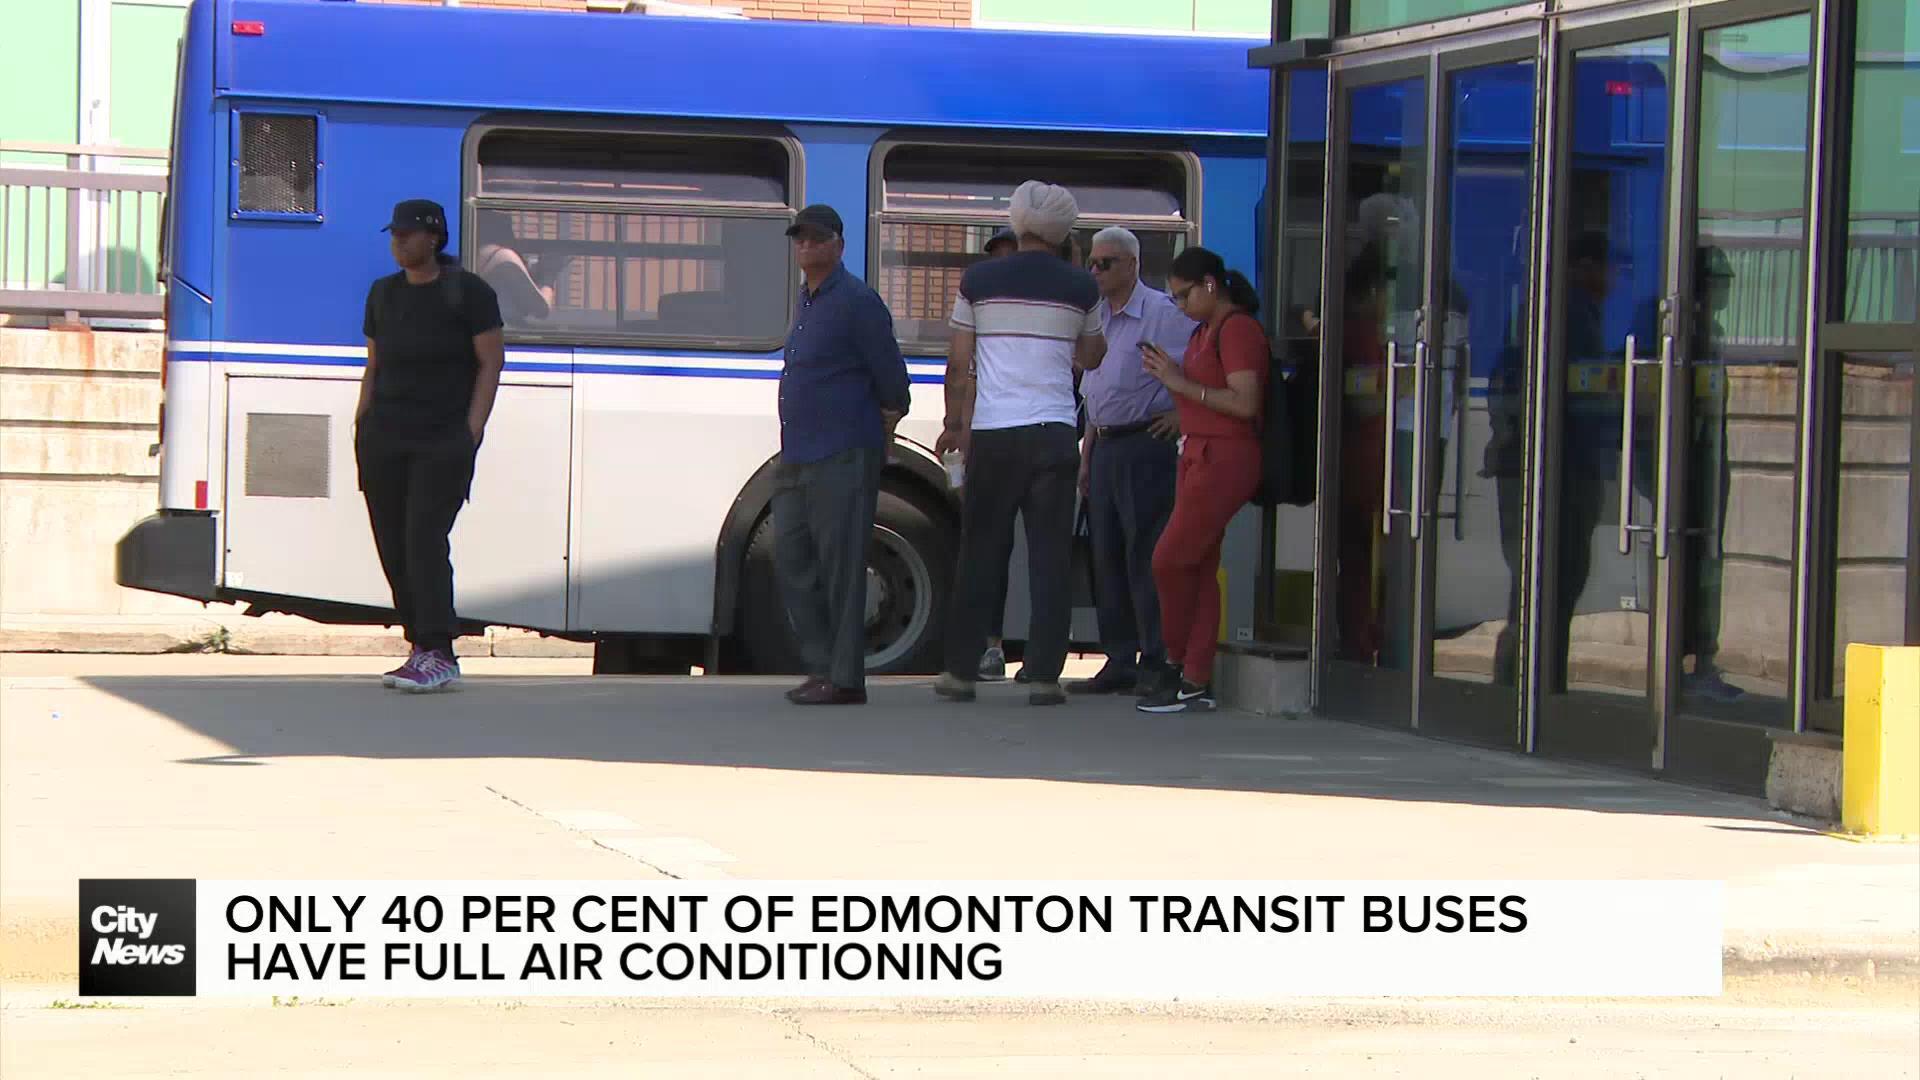 Only 40 percent of Edmonton buses have full air conditioning